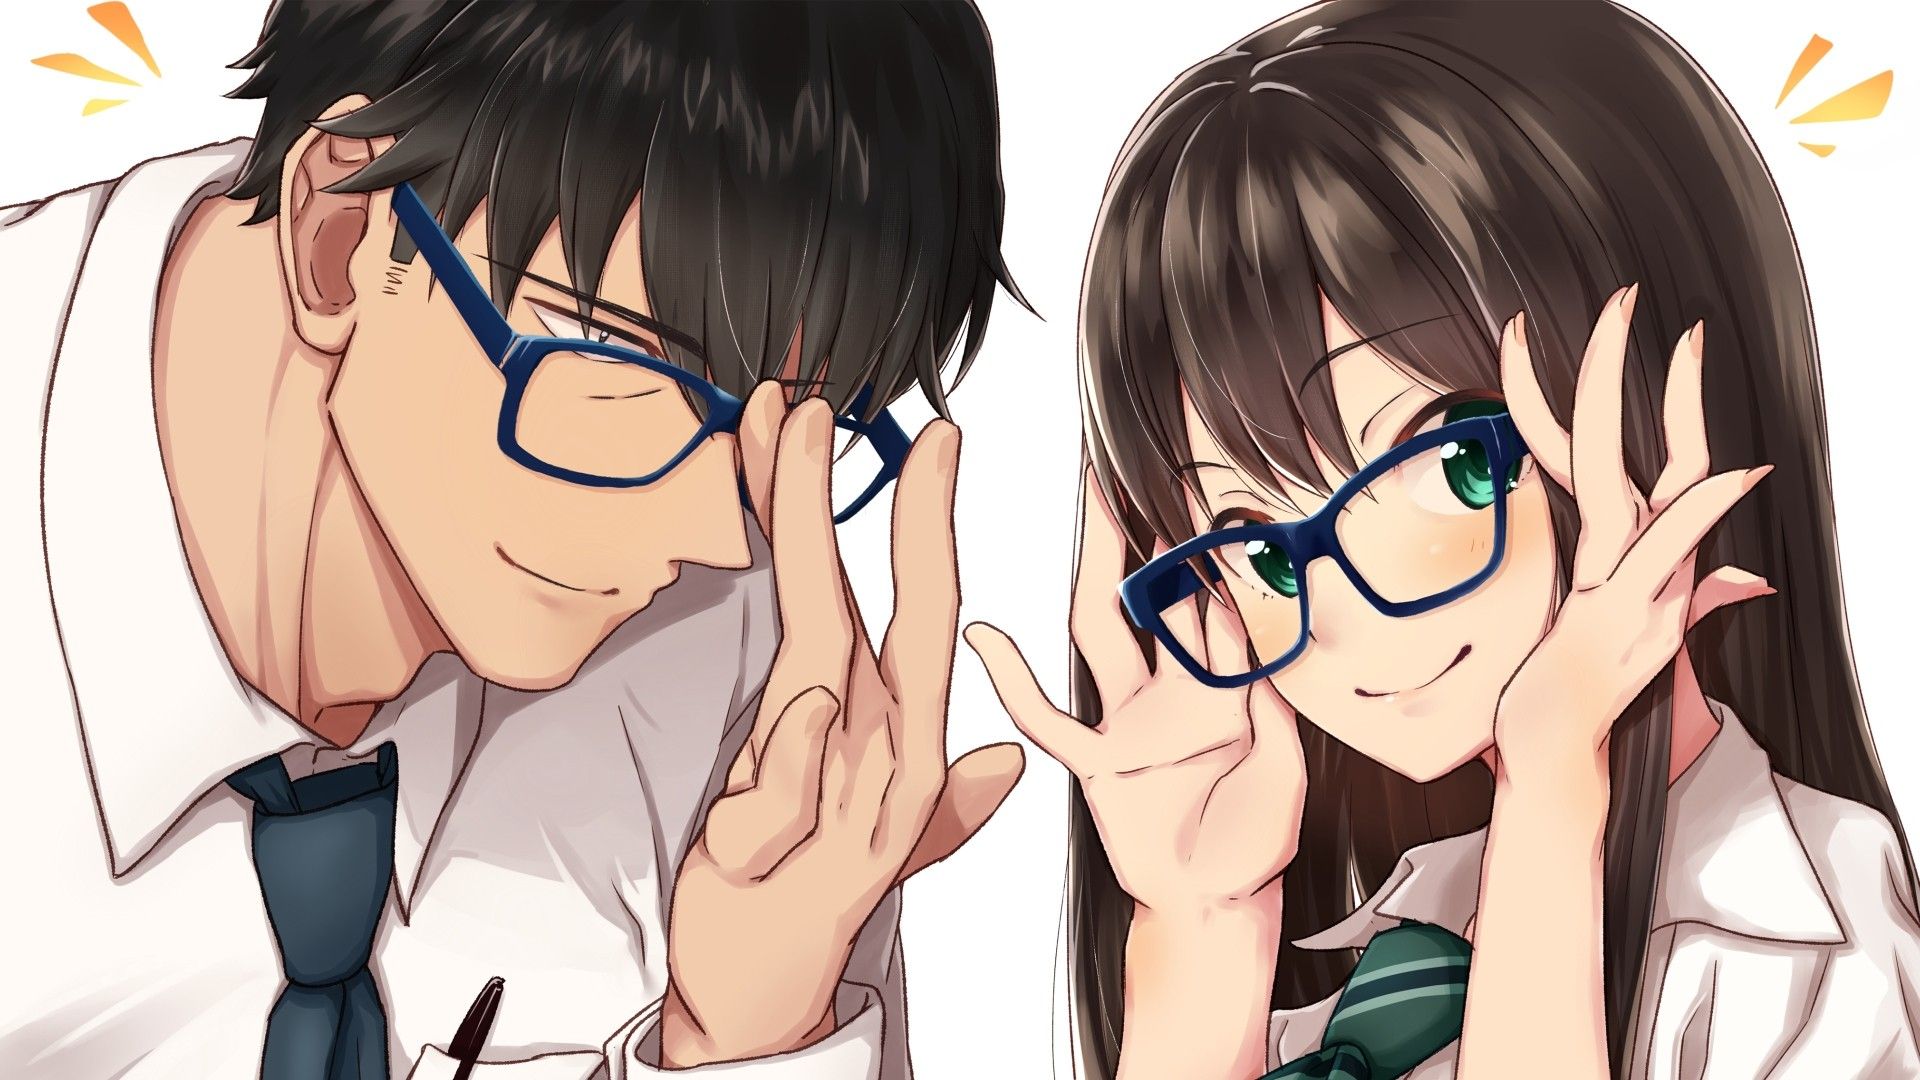 Anime Guy with Glasses Wallpaper